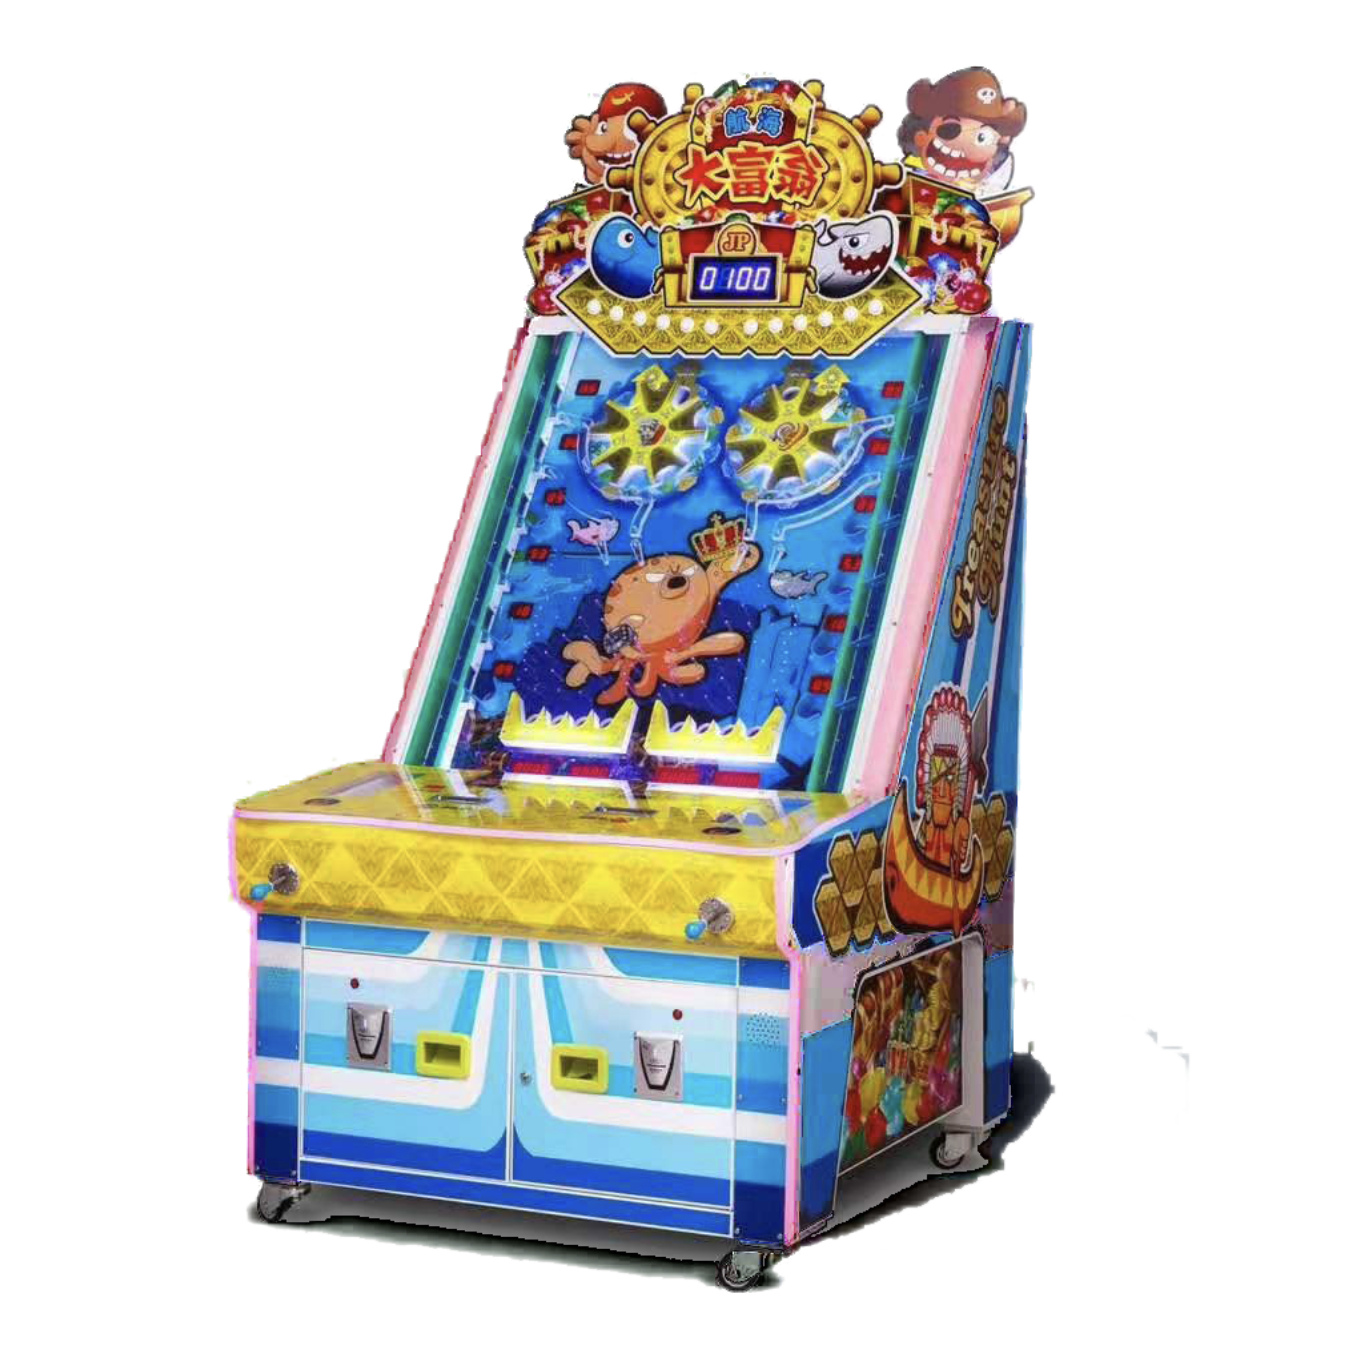 Most Popular Ticket Skill Arcade Games For Sale Made In China